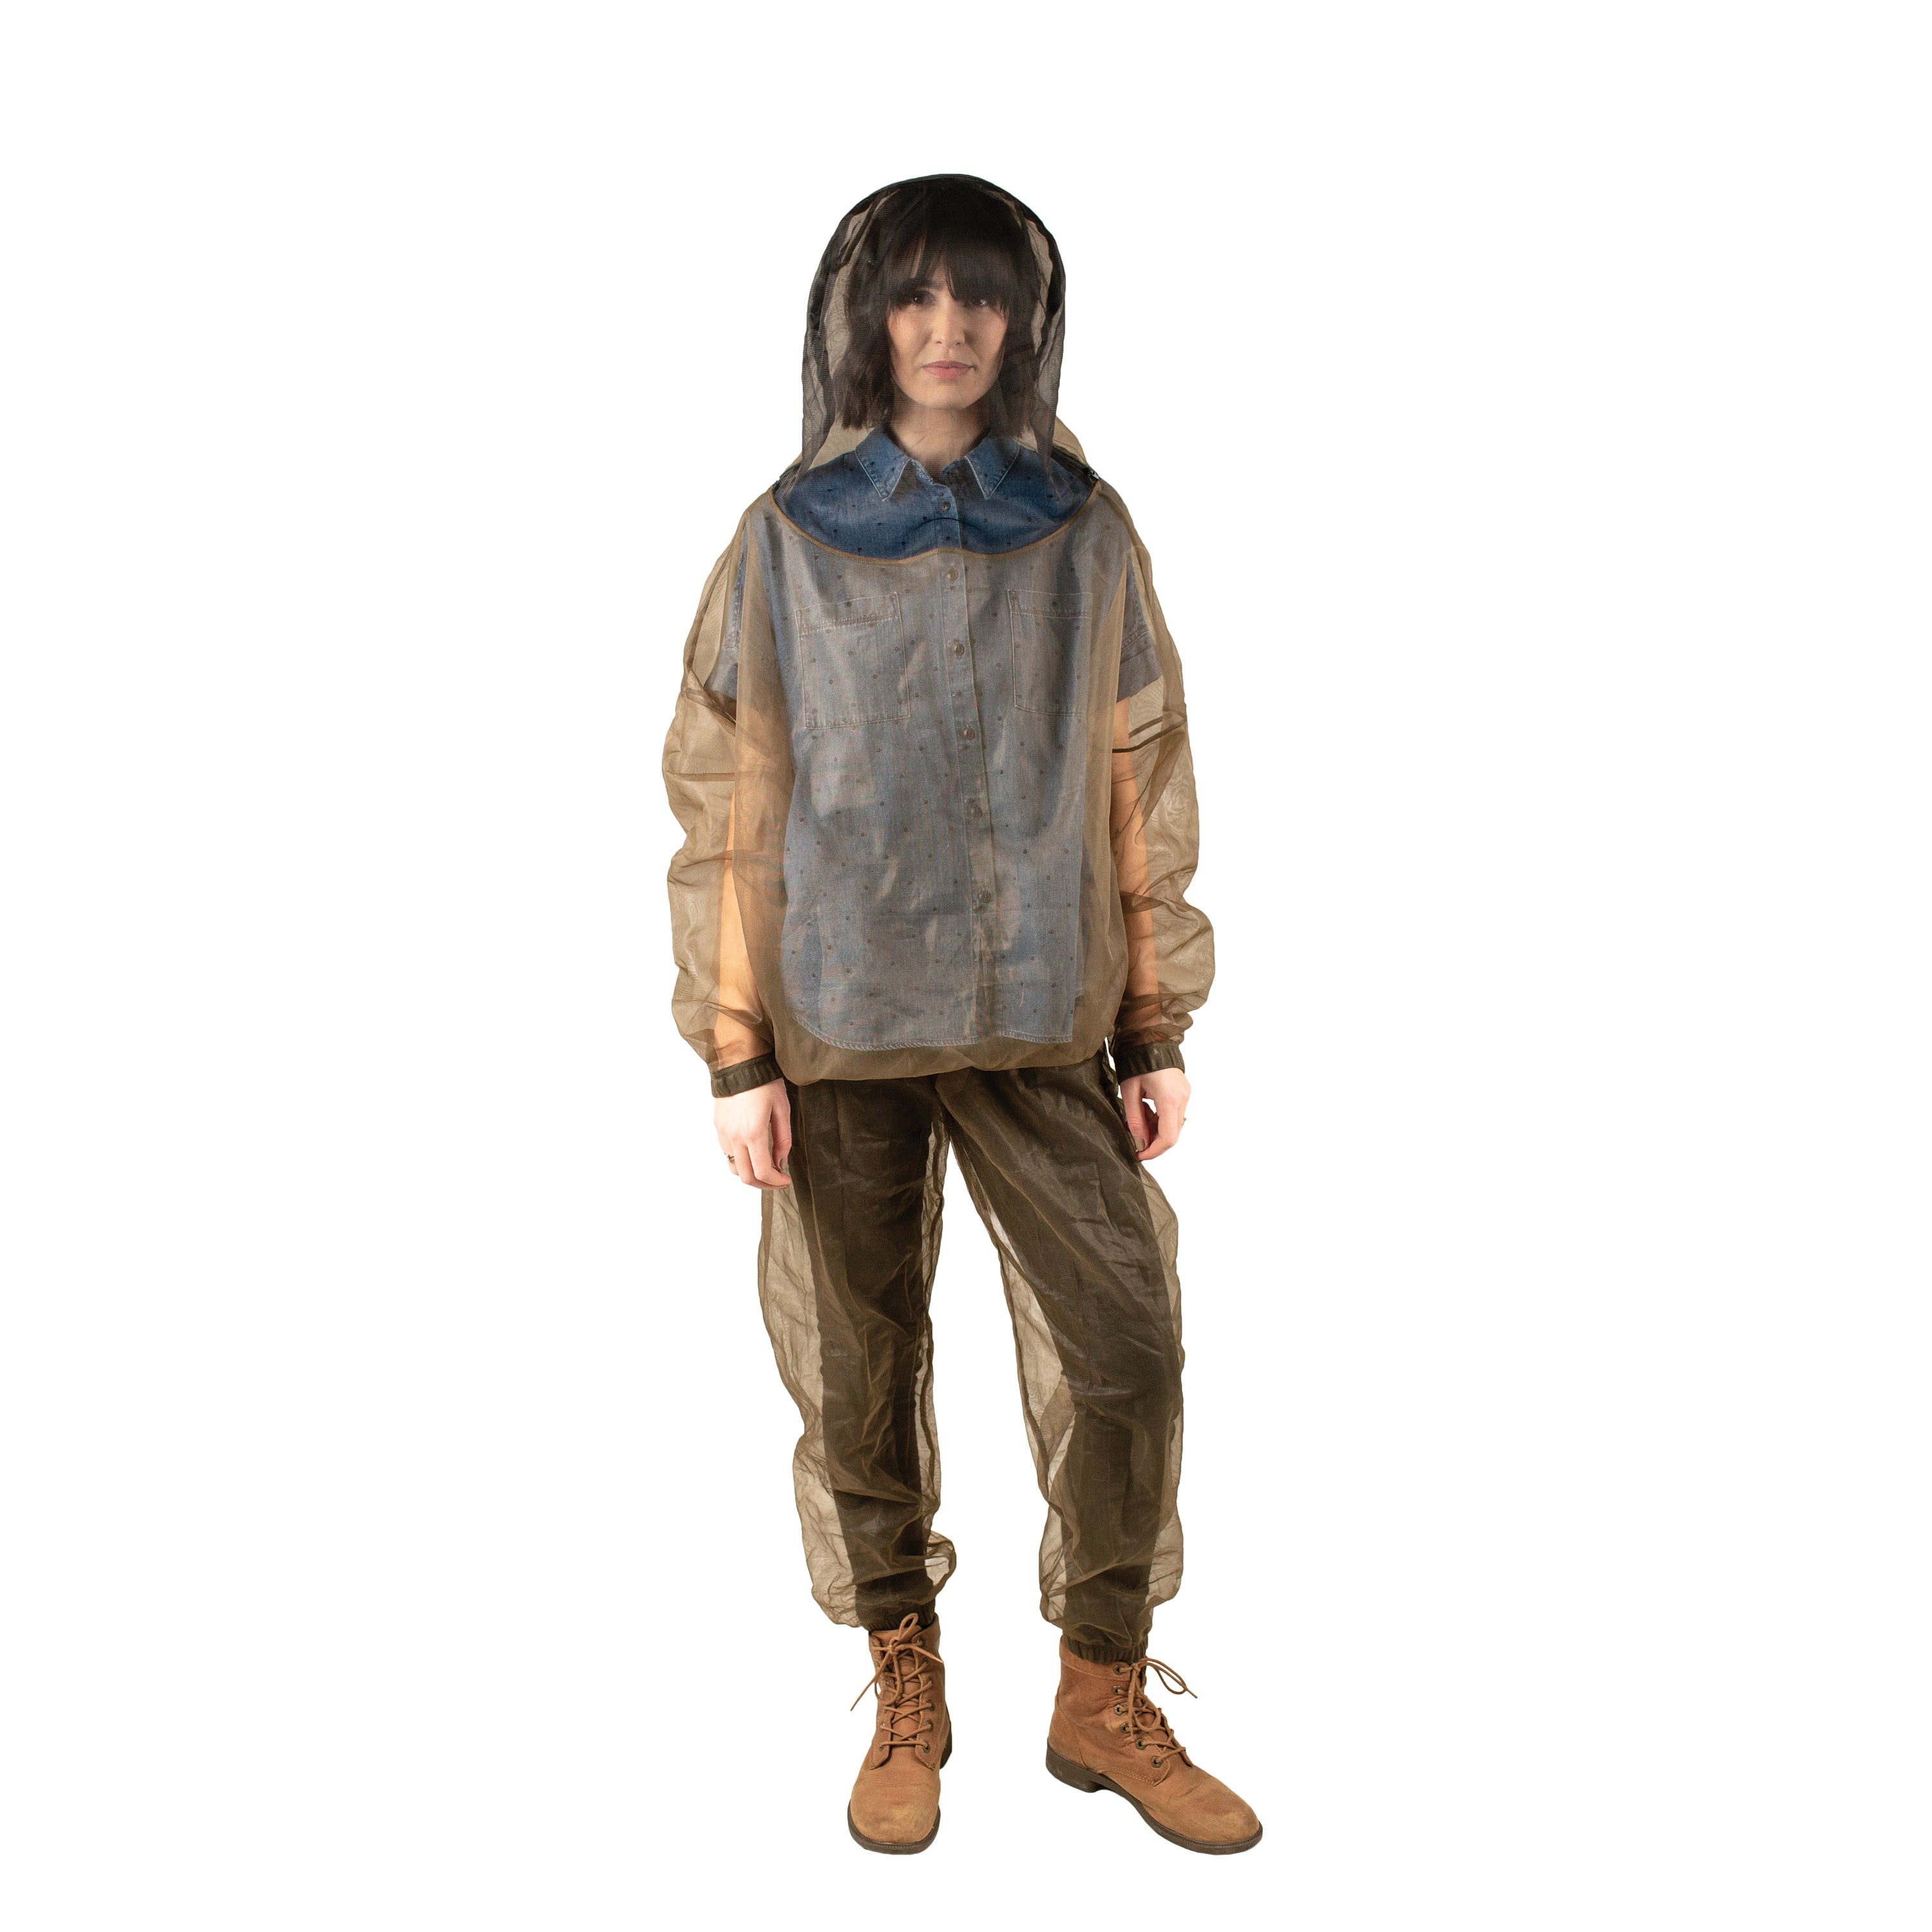 Mosquito Suit S/M-eSafety Supplies, Inc